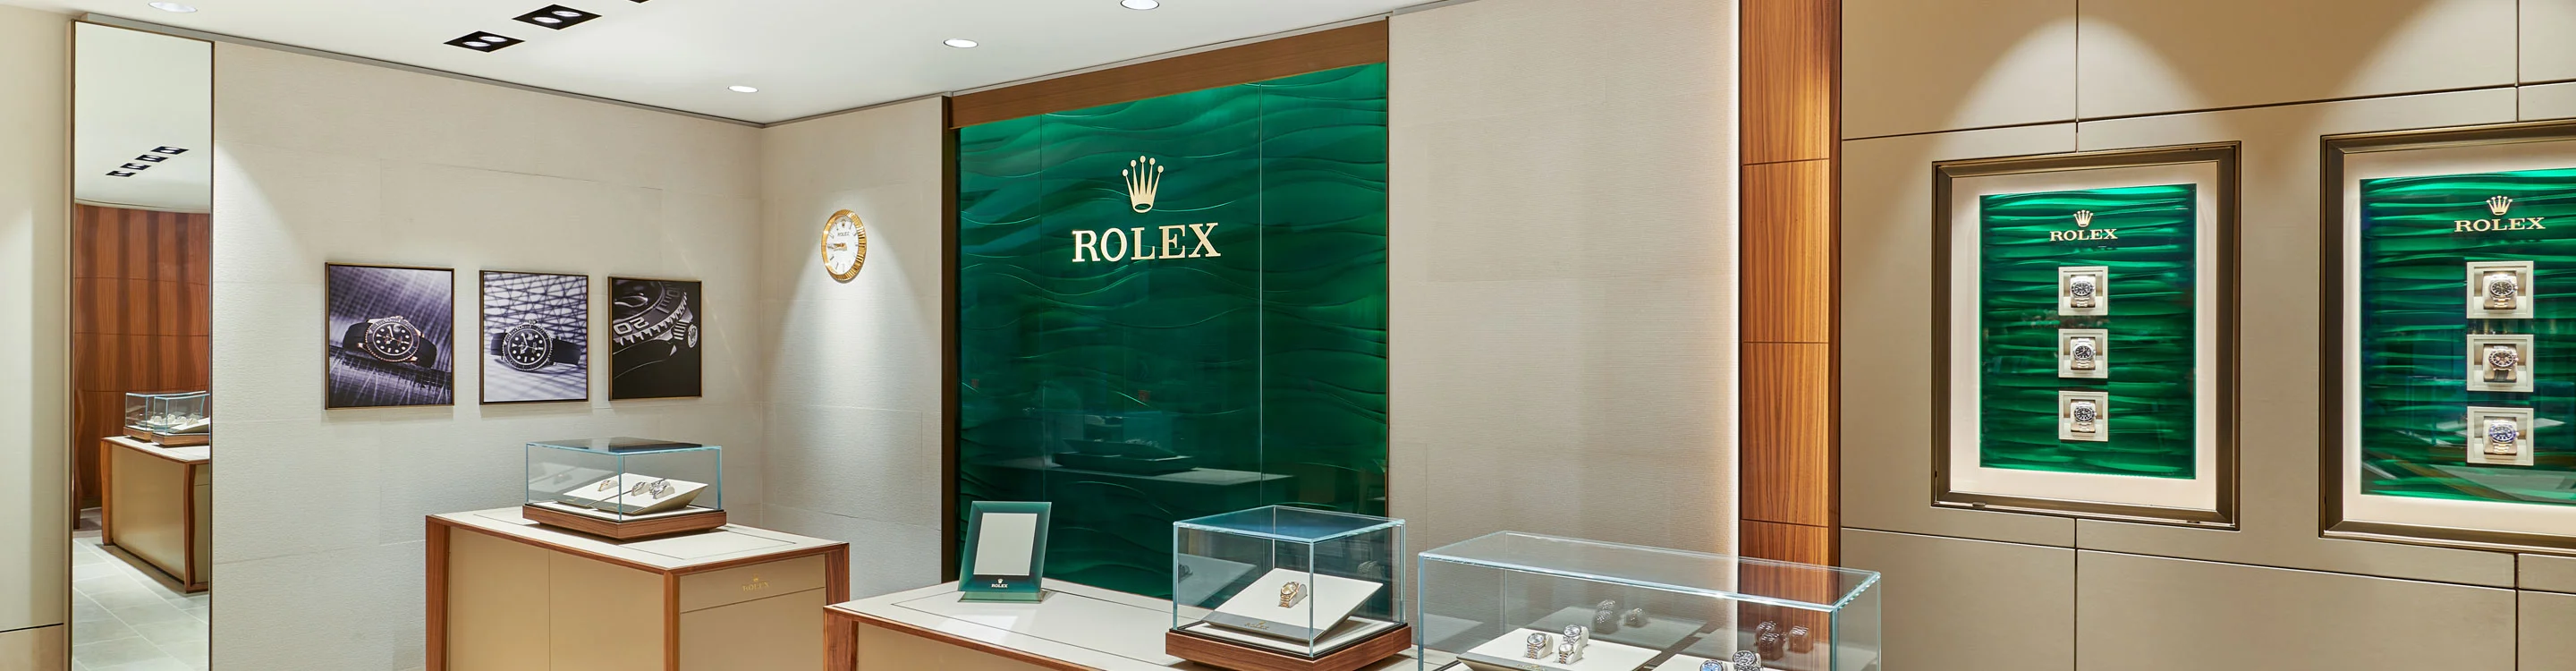 Our Rolex history